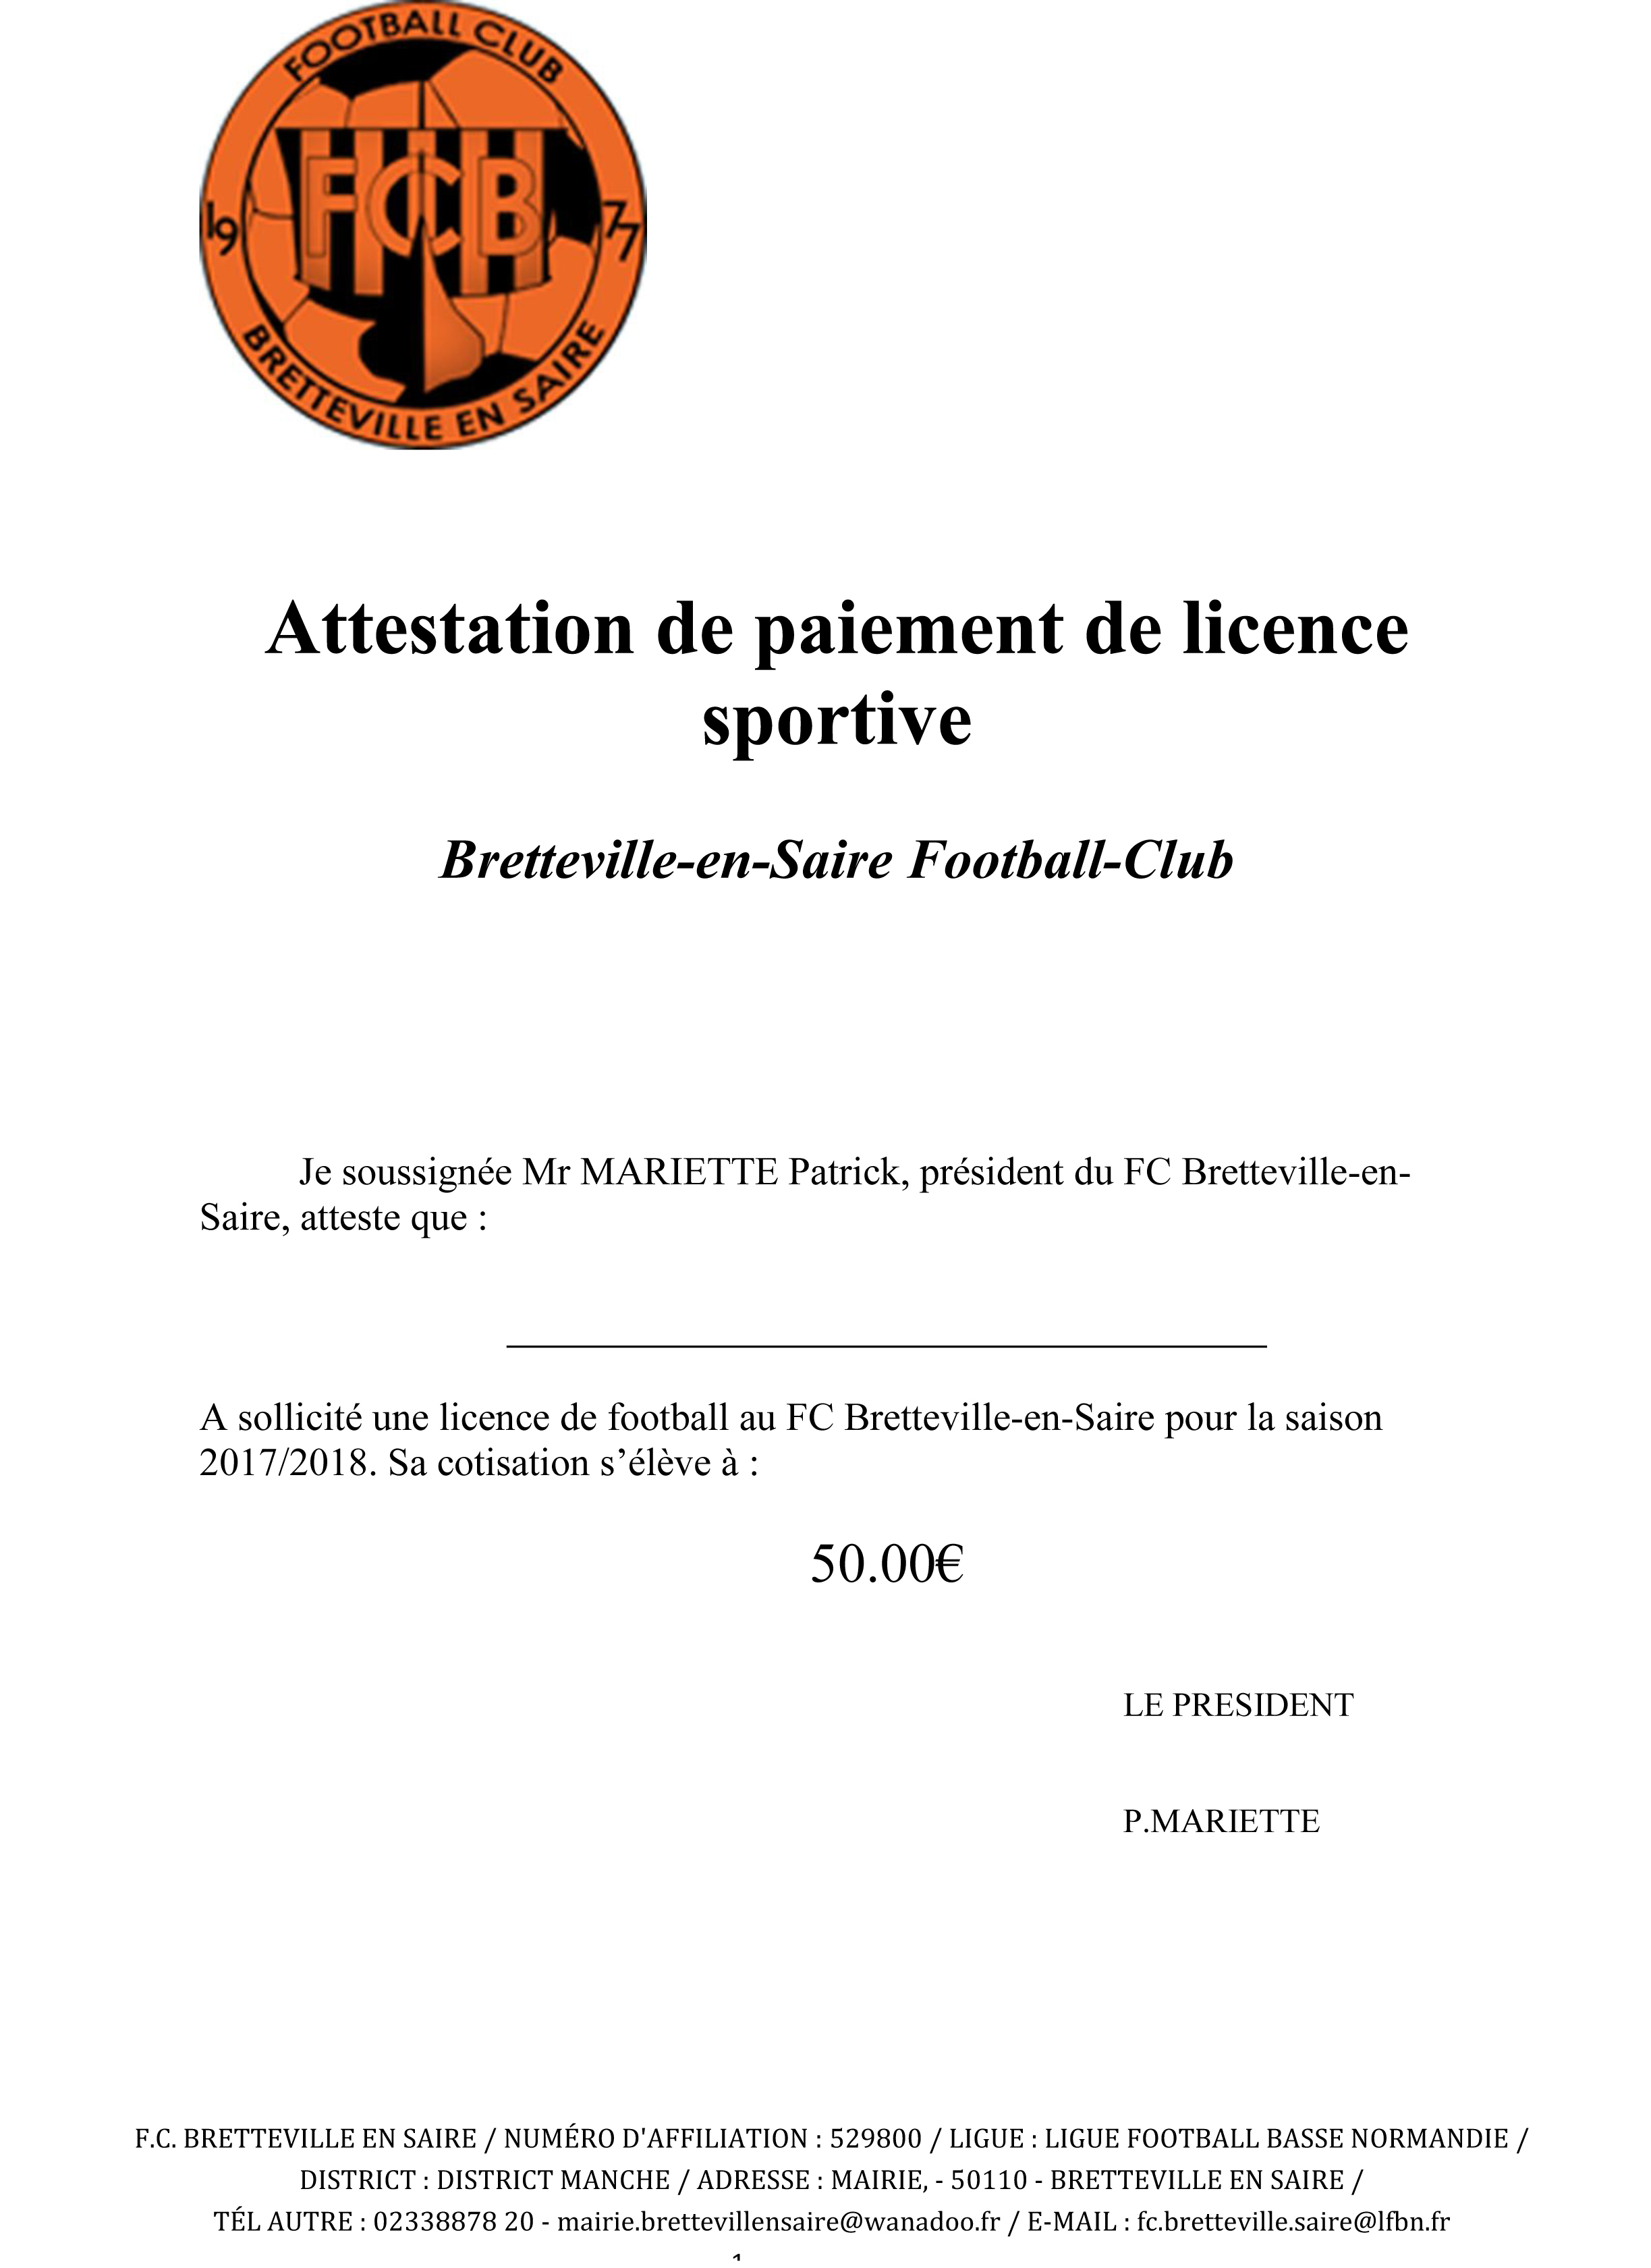 exemple facture licence sportive